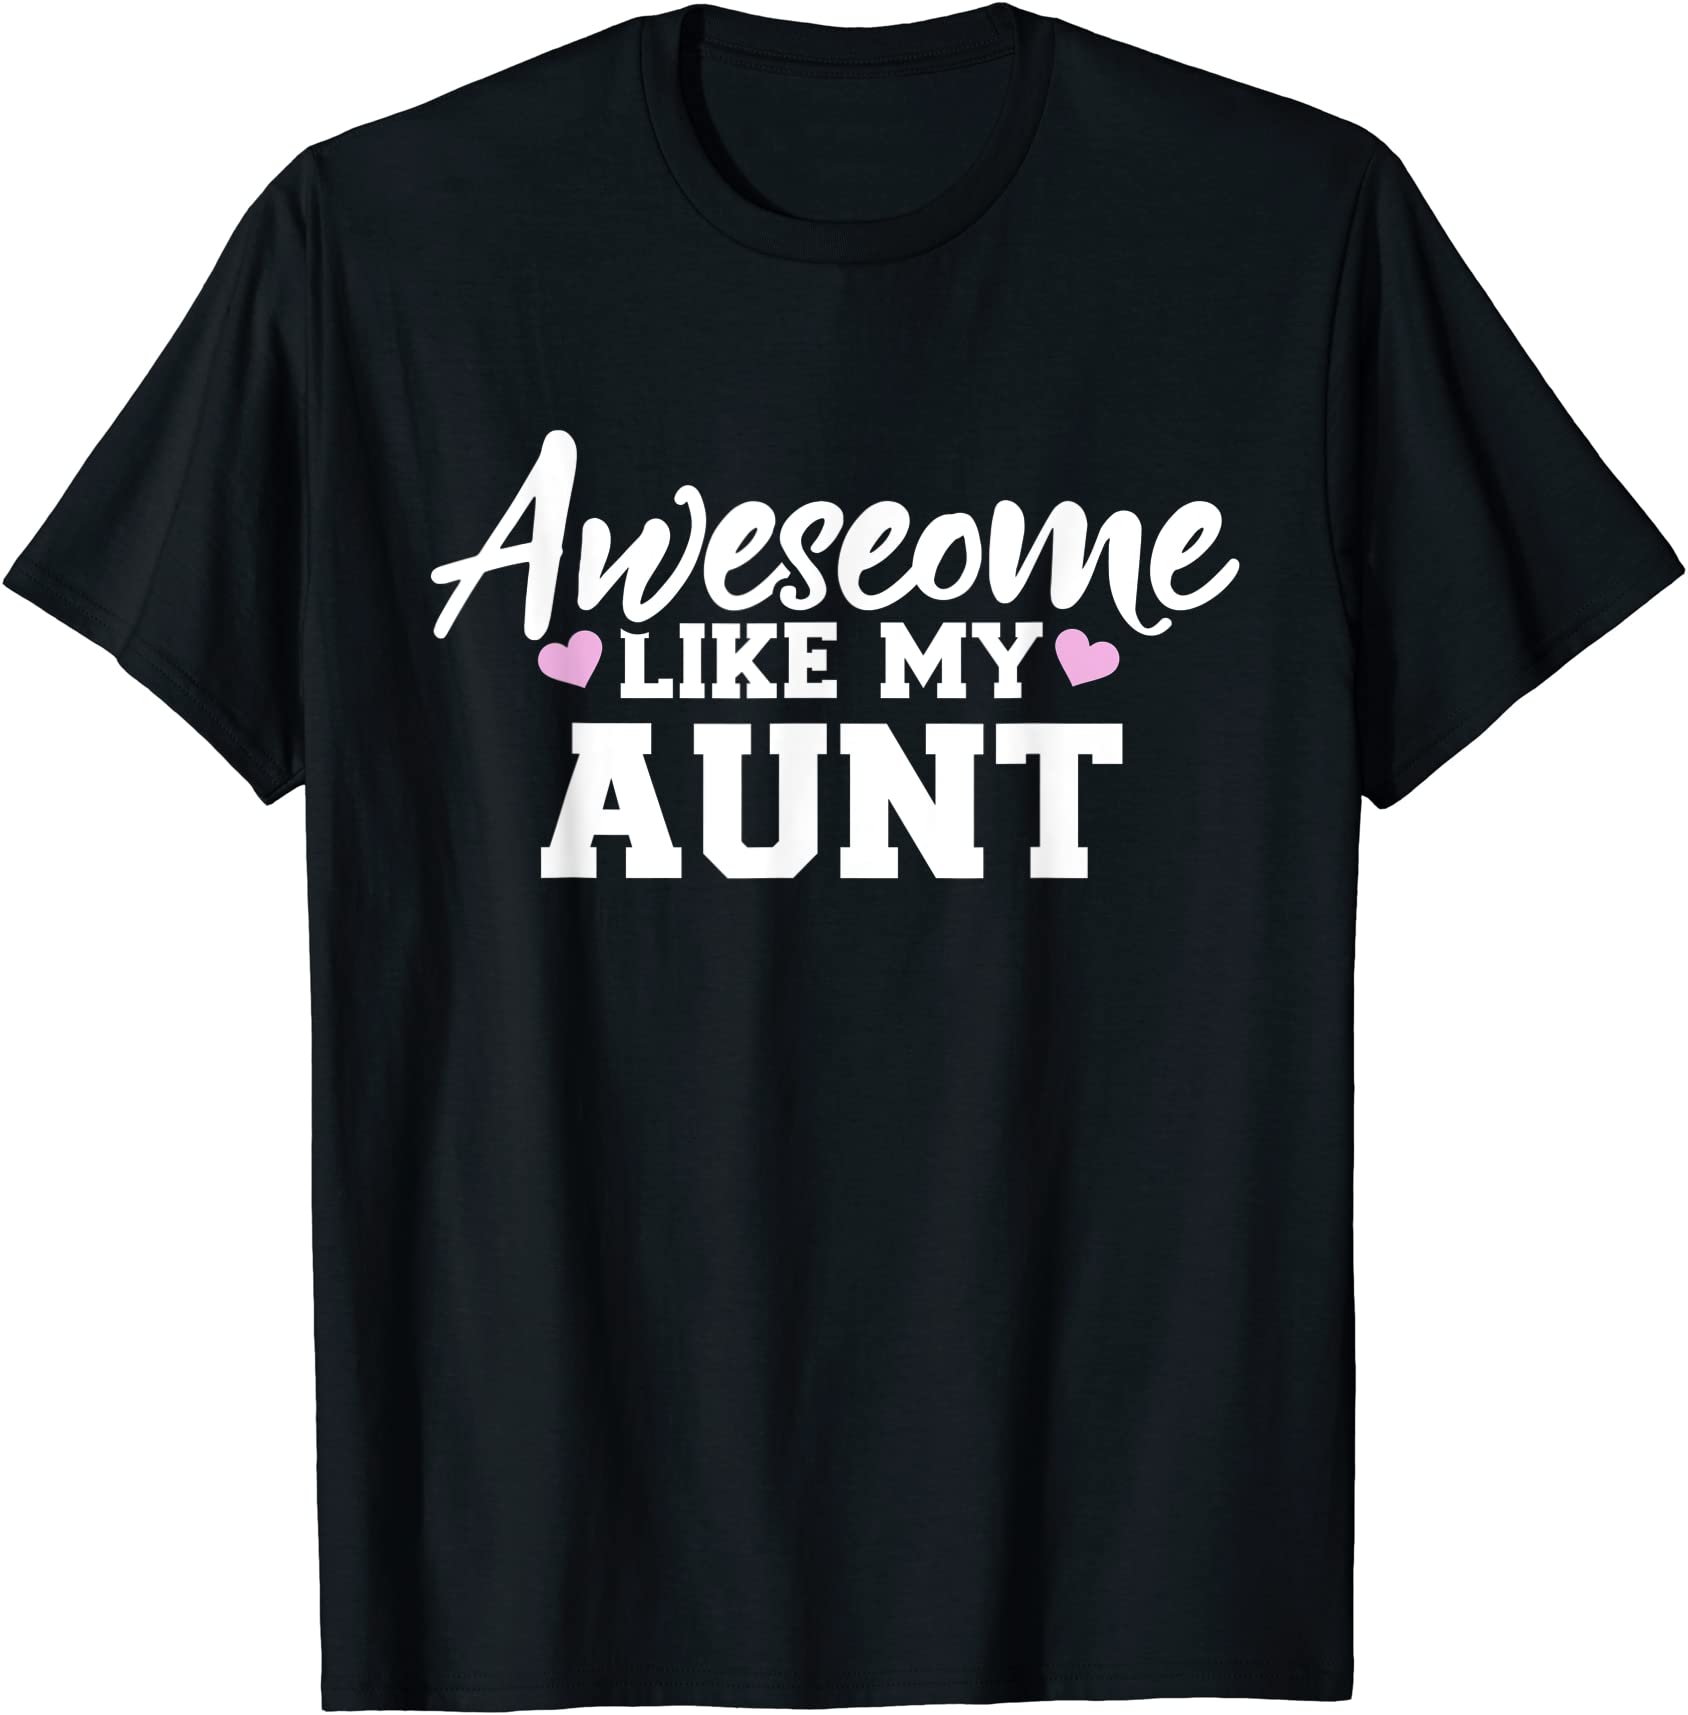 awesome like my aunt t shirt men - Buy t-shirt designs